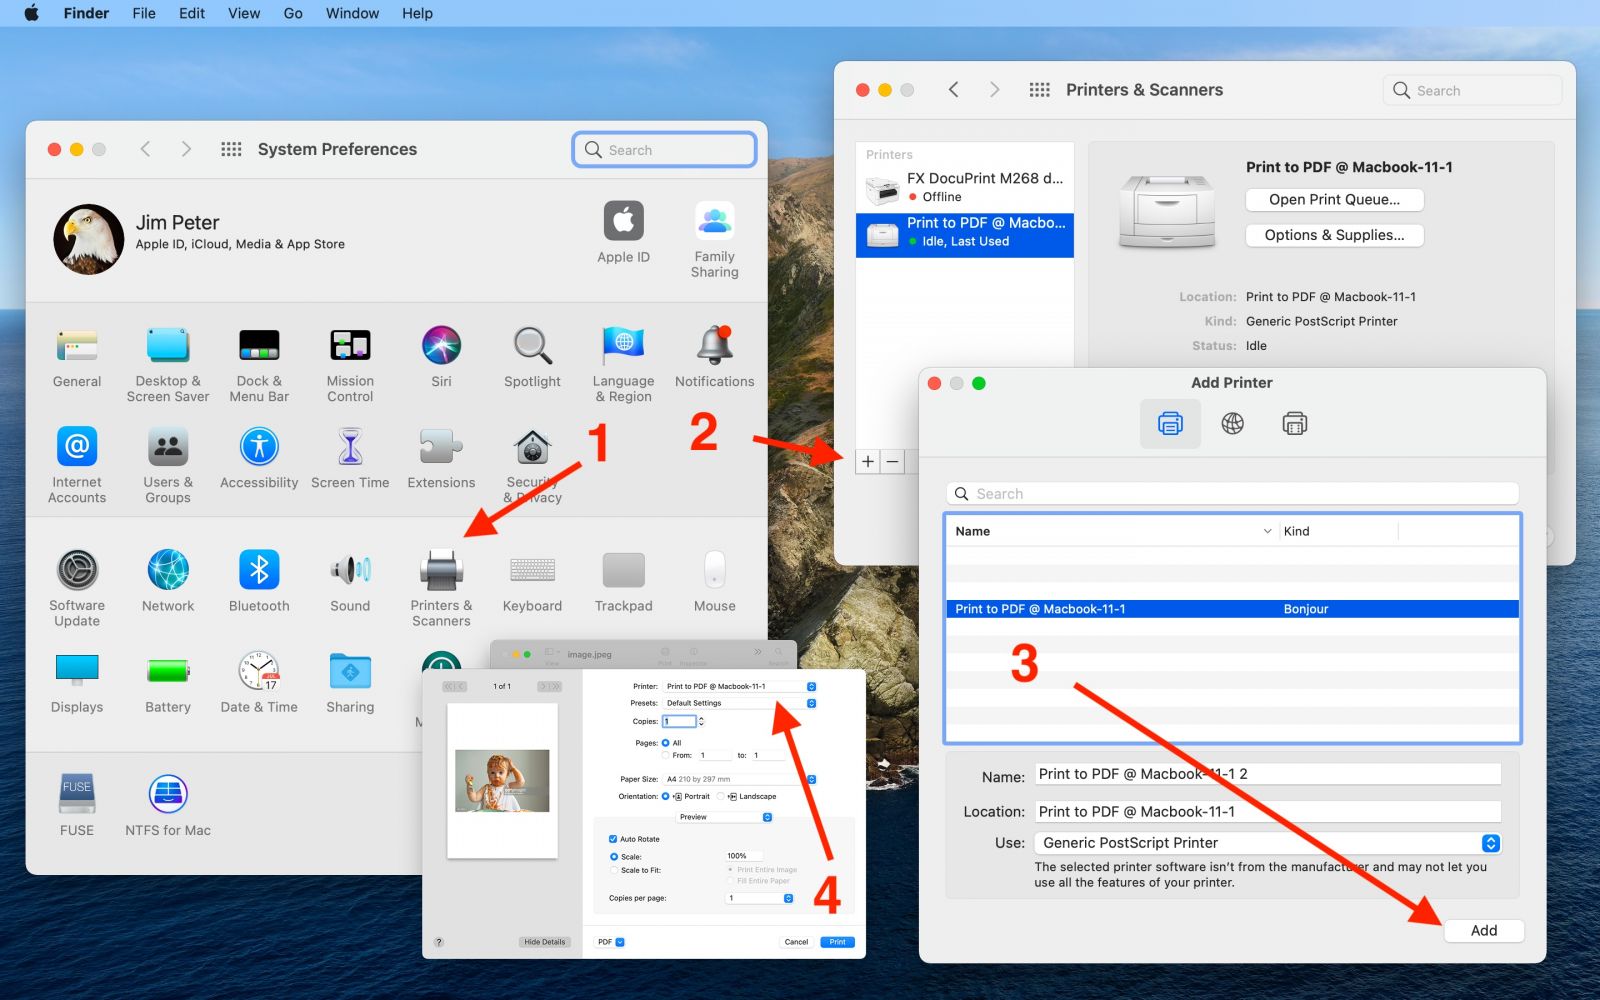 How to Add a printer your printer so you can use it on Mac? - Flyingbee Software